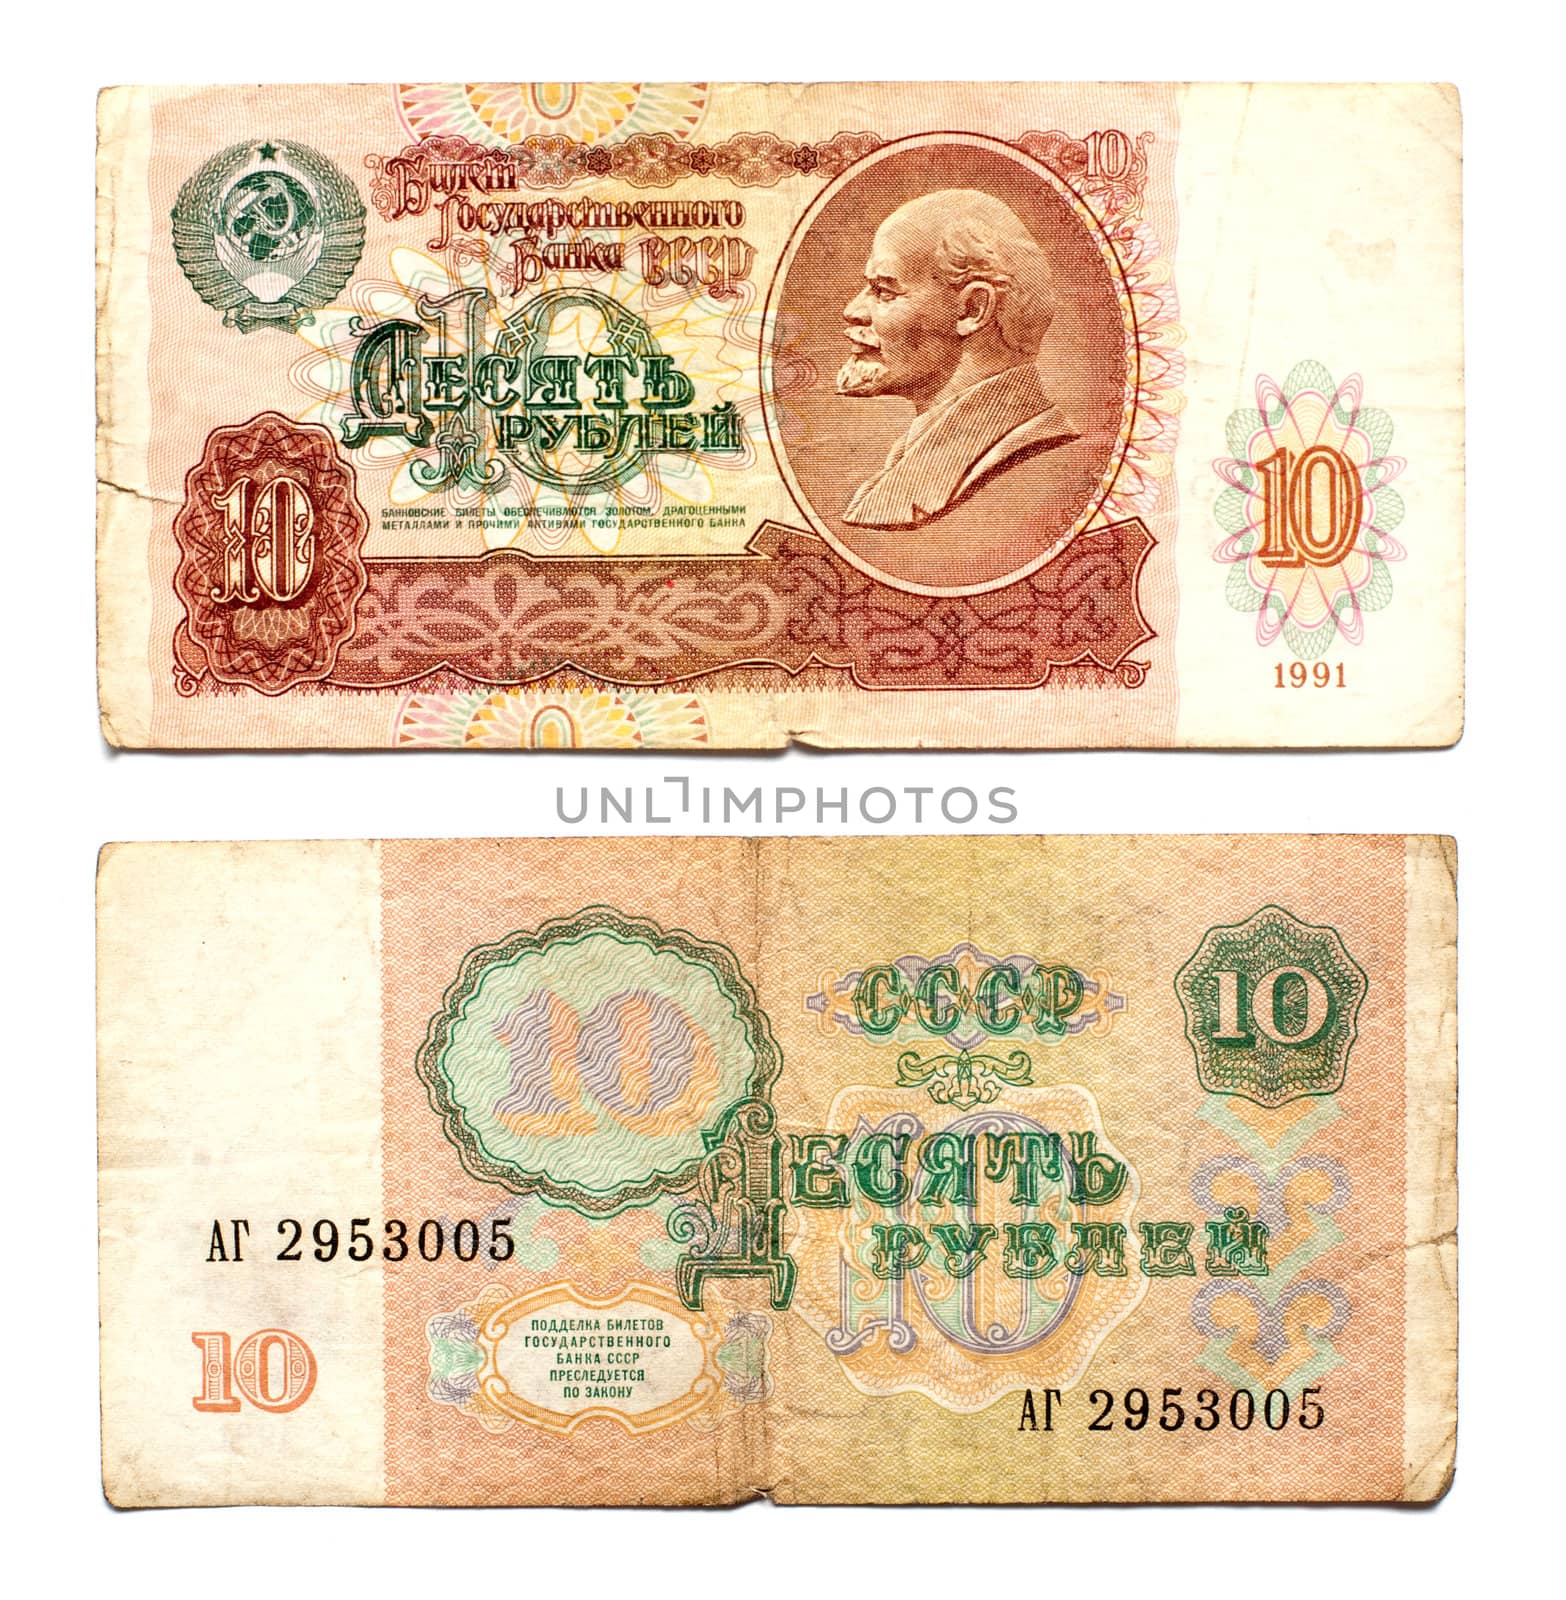 10 Rubles banknote with a portrait of Lenin - vintage withdrawn currency